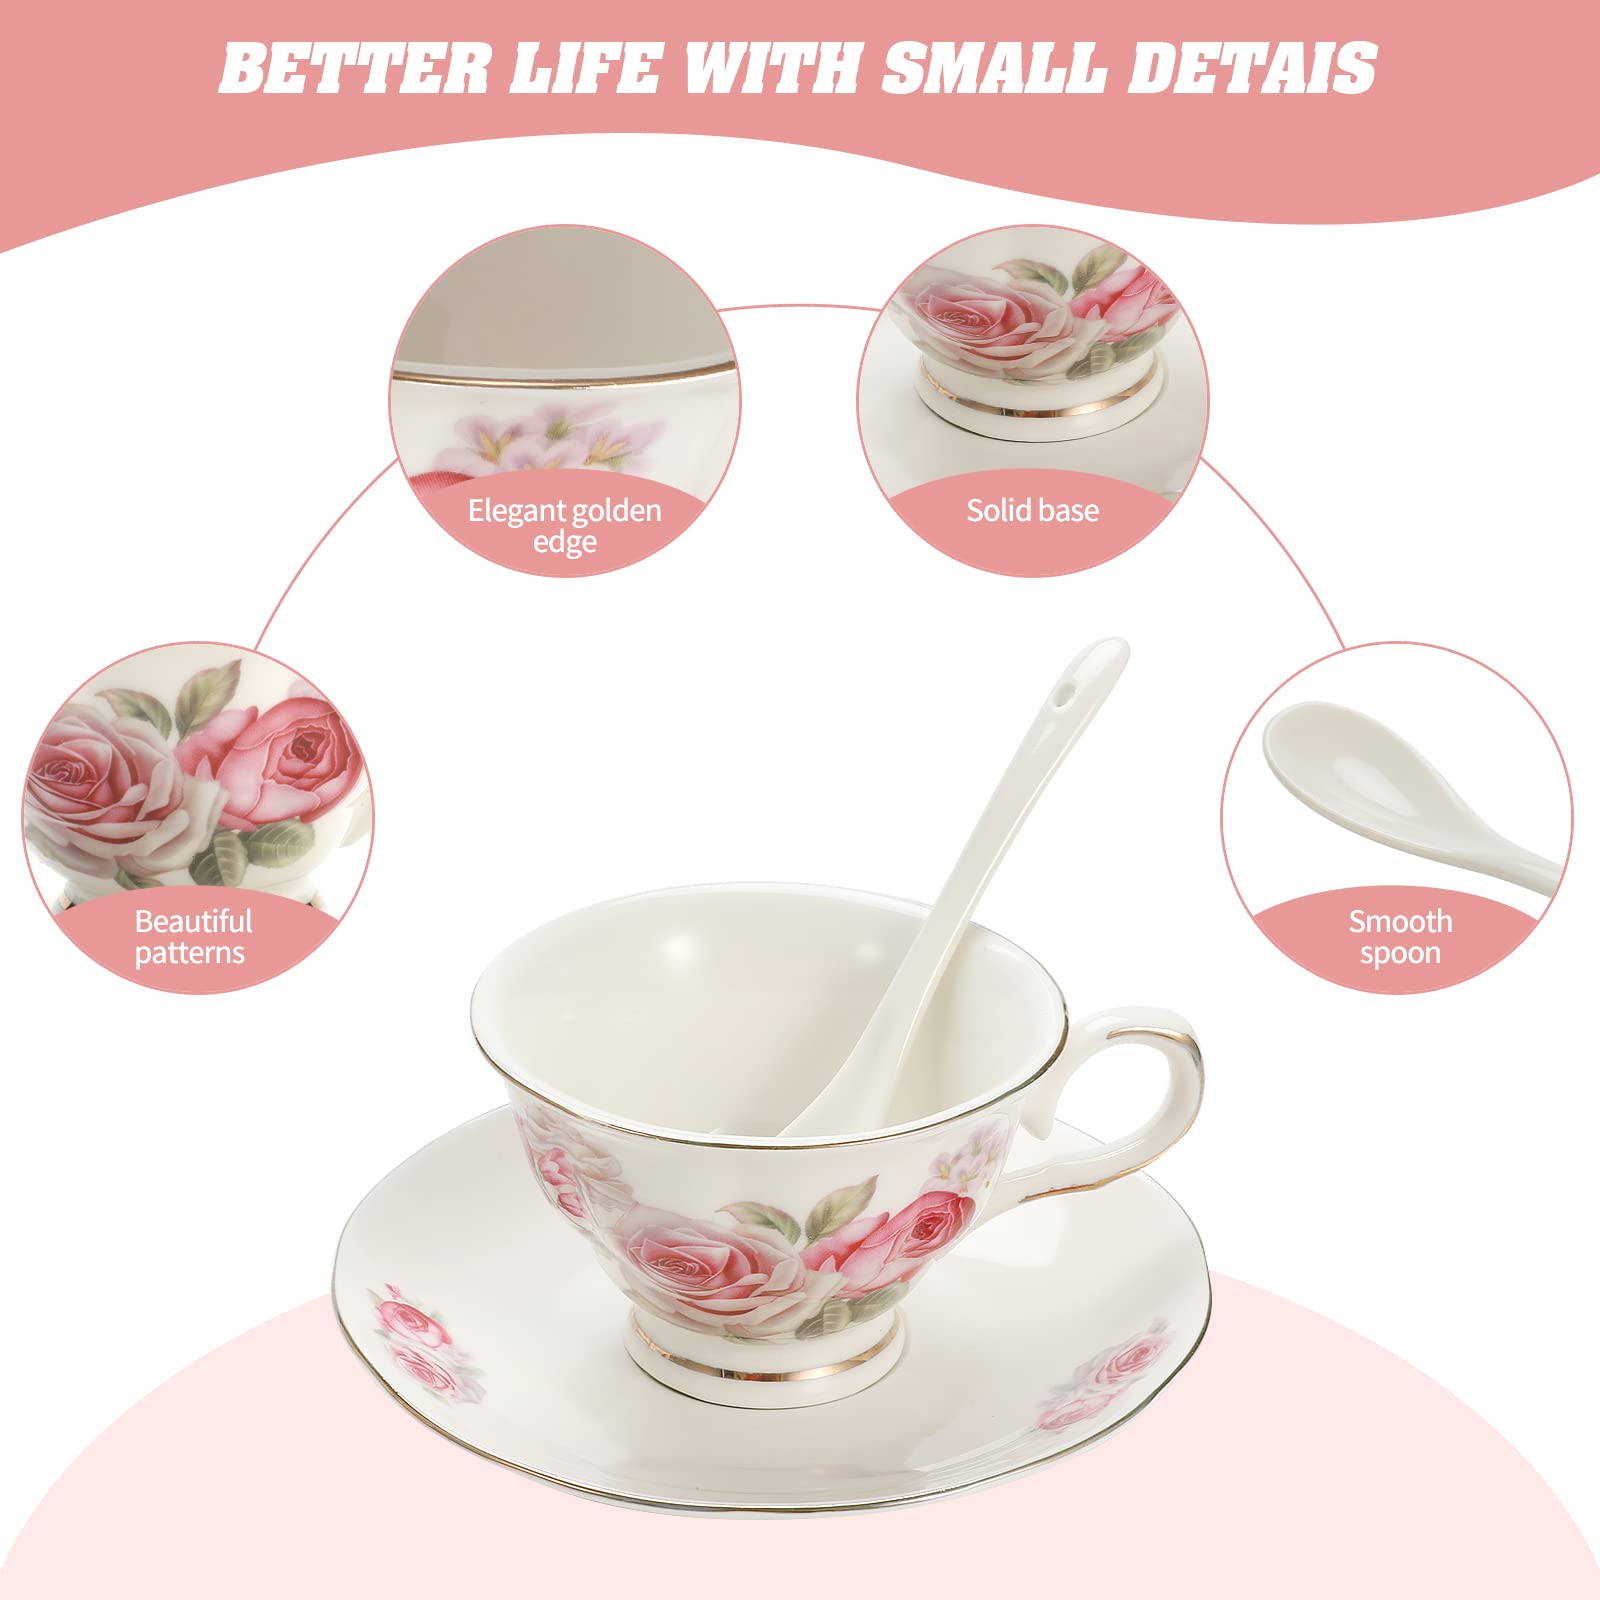 Viktorwan Porcelain Tea Cup and Saucer Coffee Cup Set with Saucer and Spoon, Set of 7 (2 Tea Cups, 2 Saucers, 2 Spoons, and 1 Bracket)